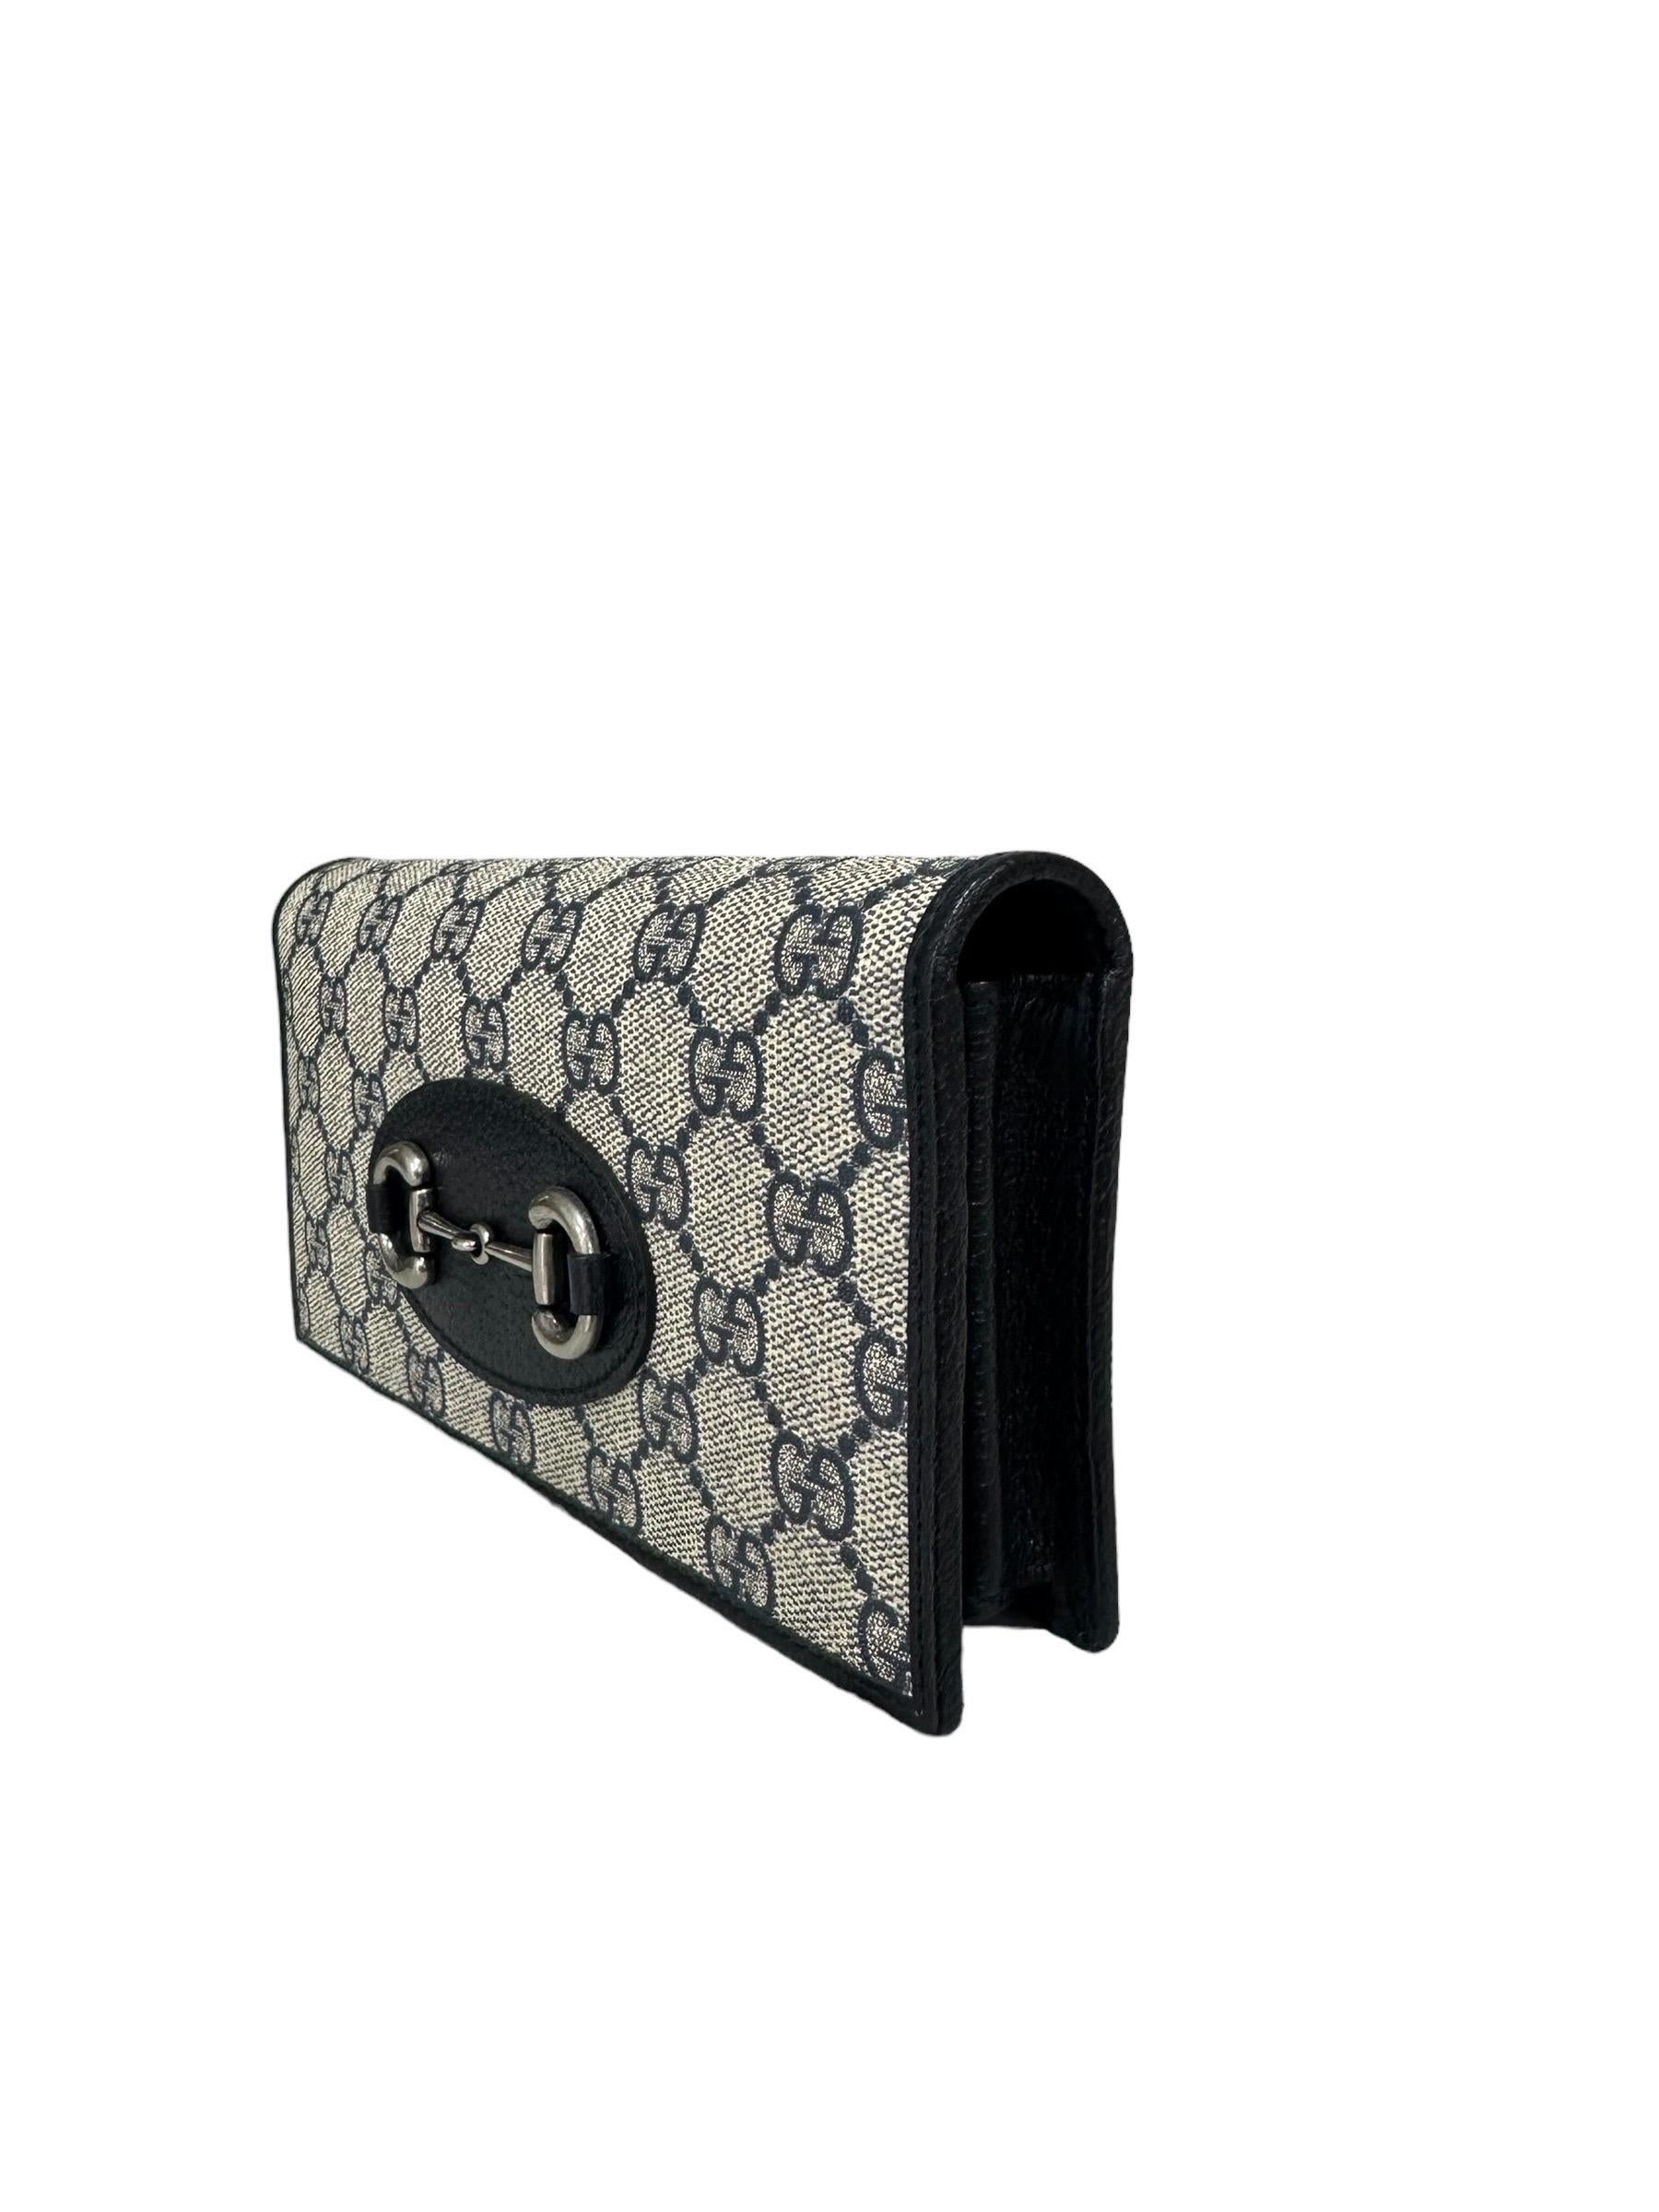 Gucci Horsebit GG Wallet On Chain For Sale 1